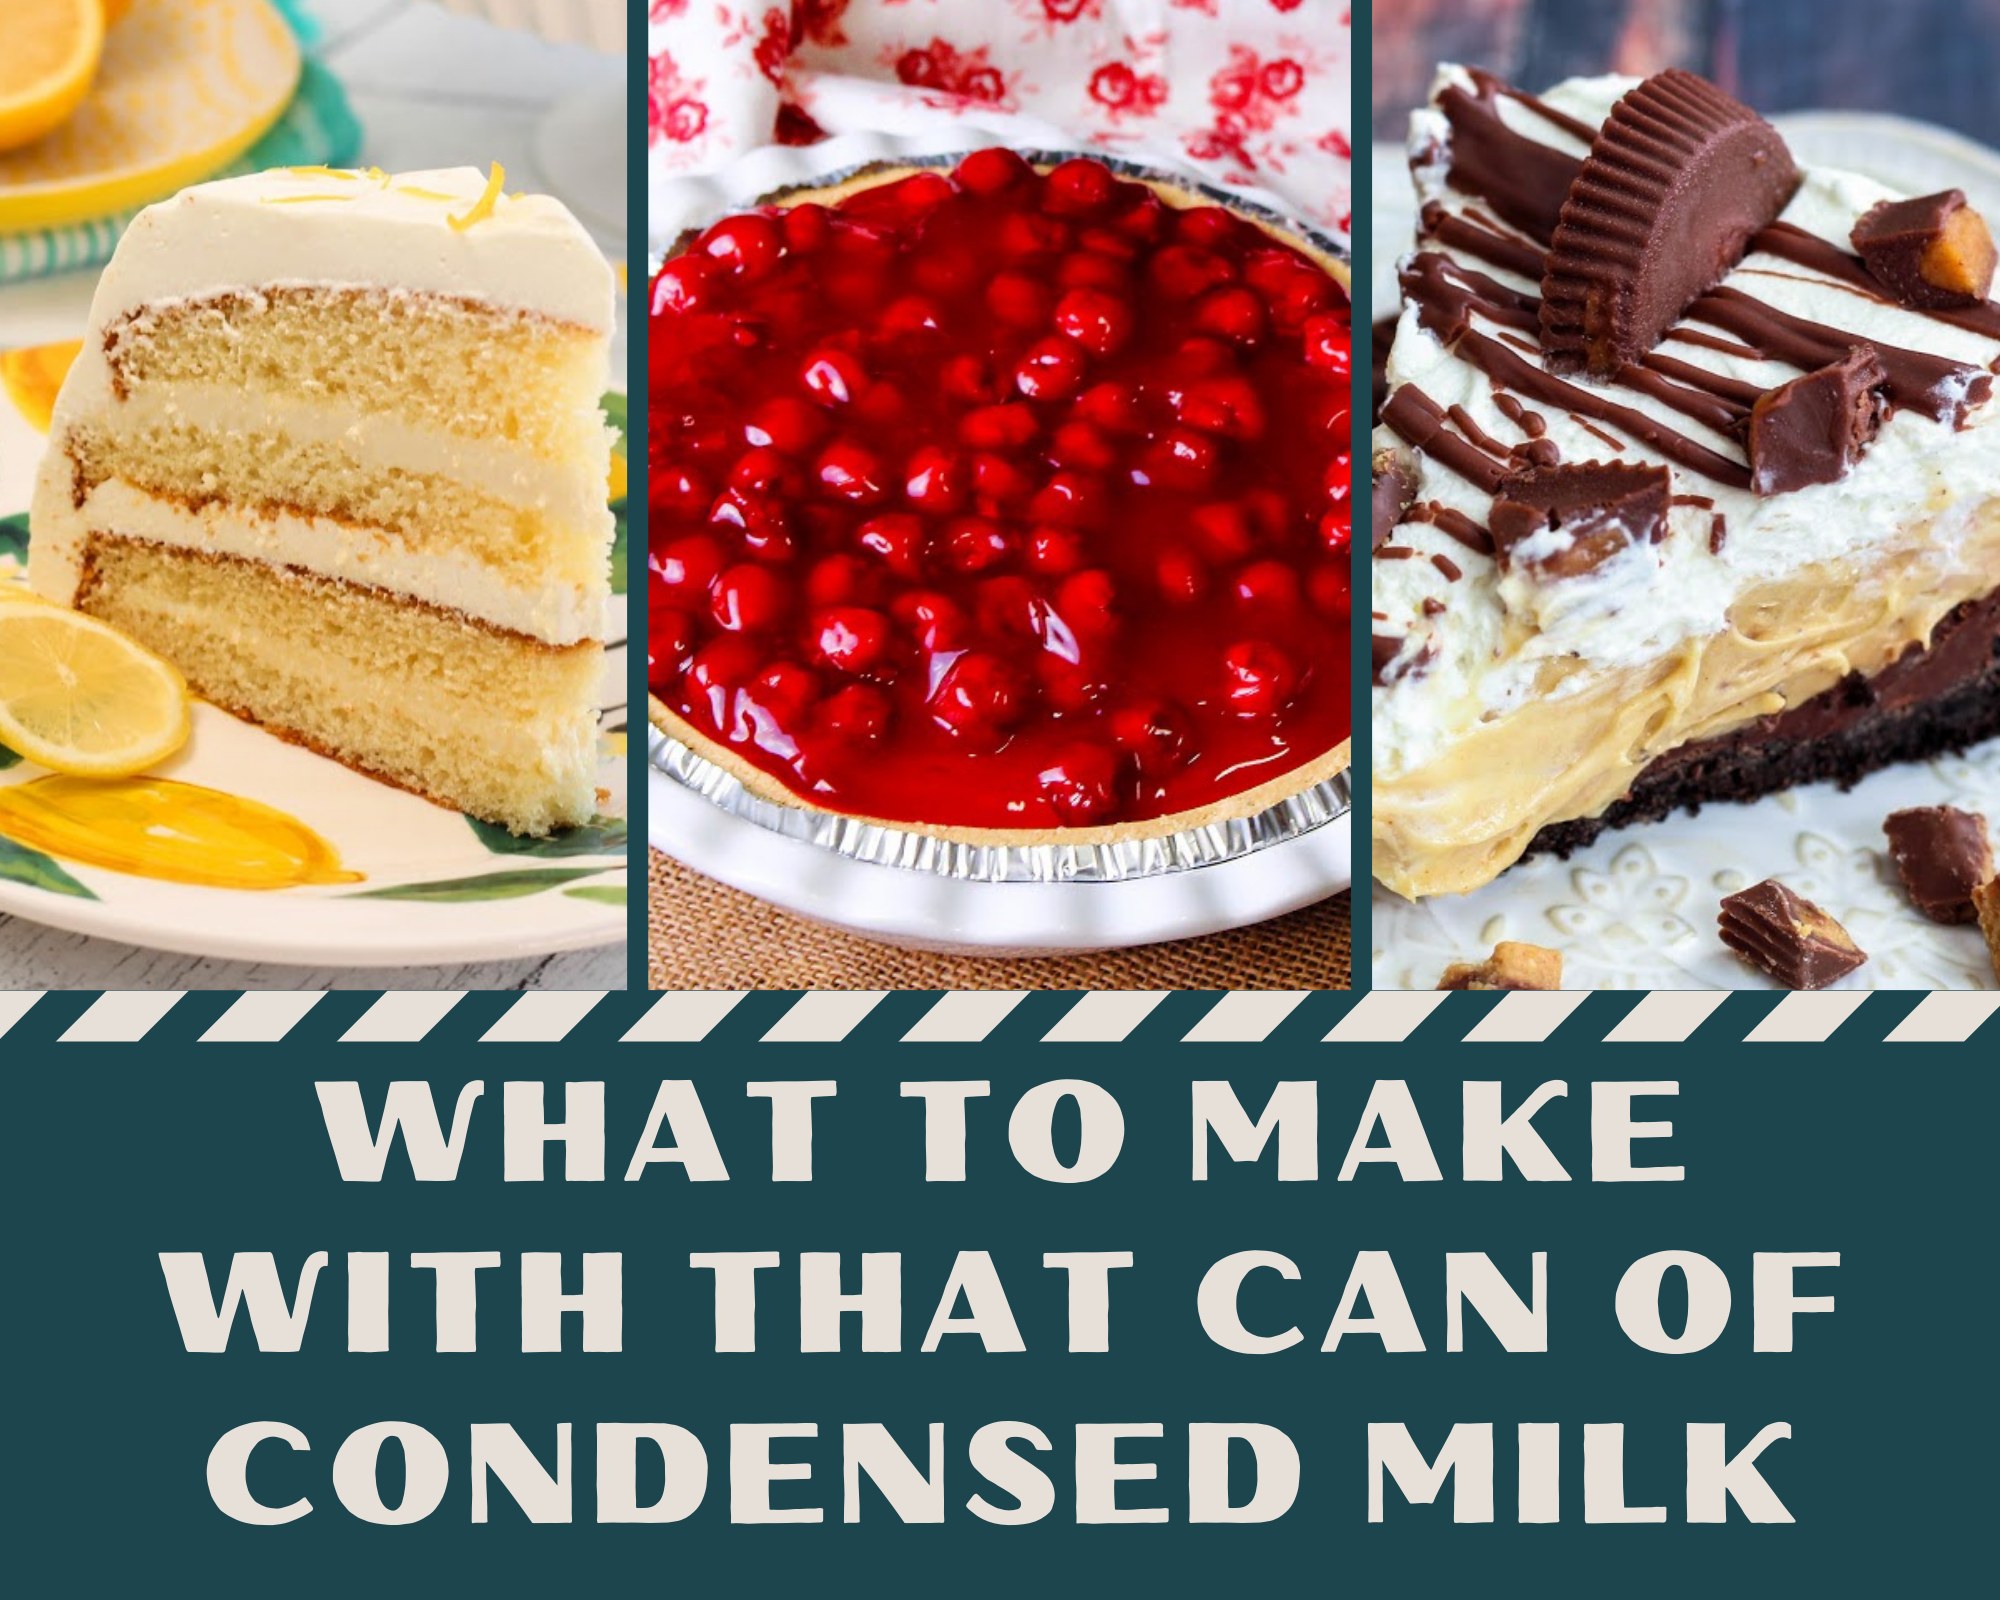 What to make with condensed milk - lemon cake, no-bake cheesecake and peanut butter pie